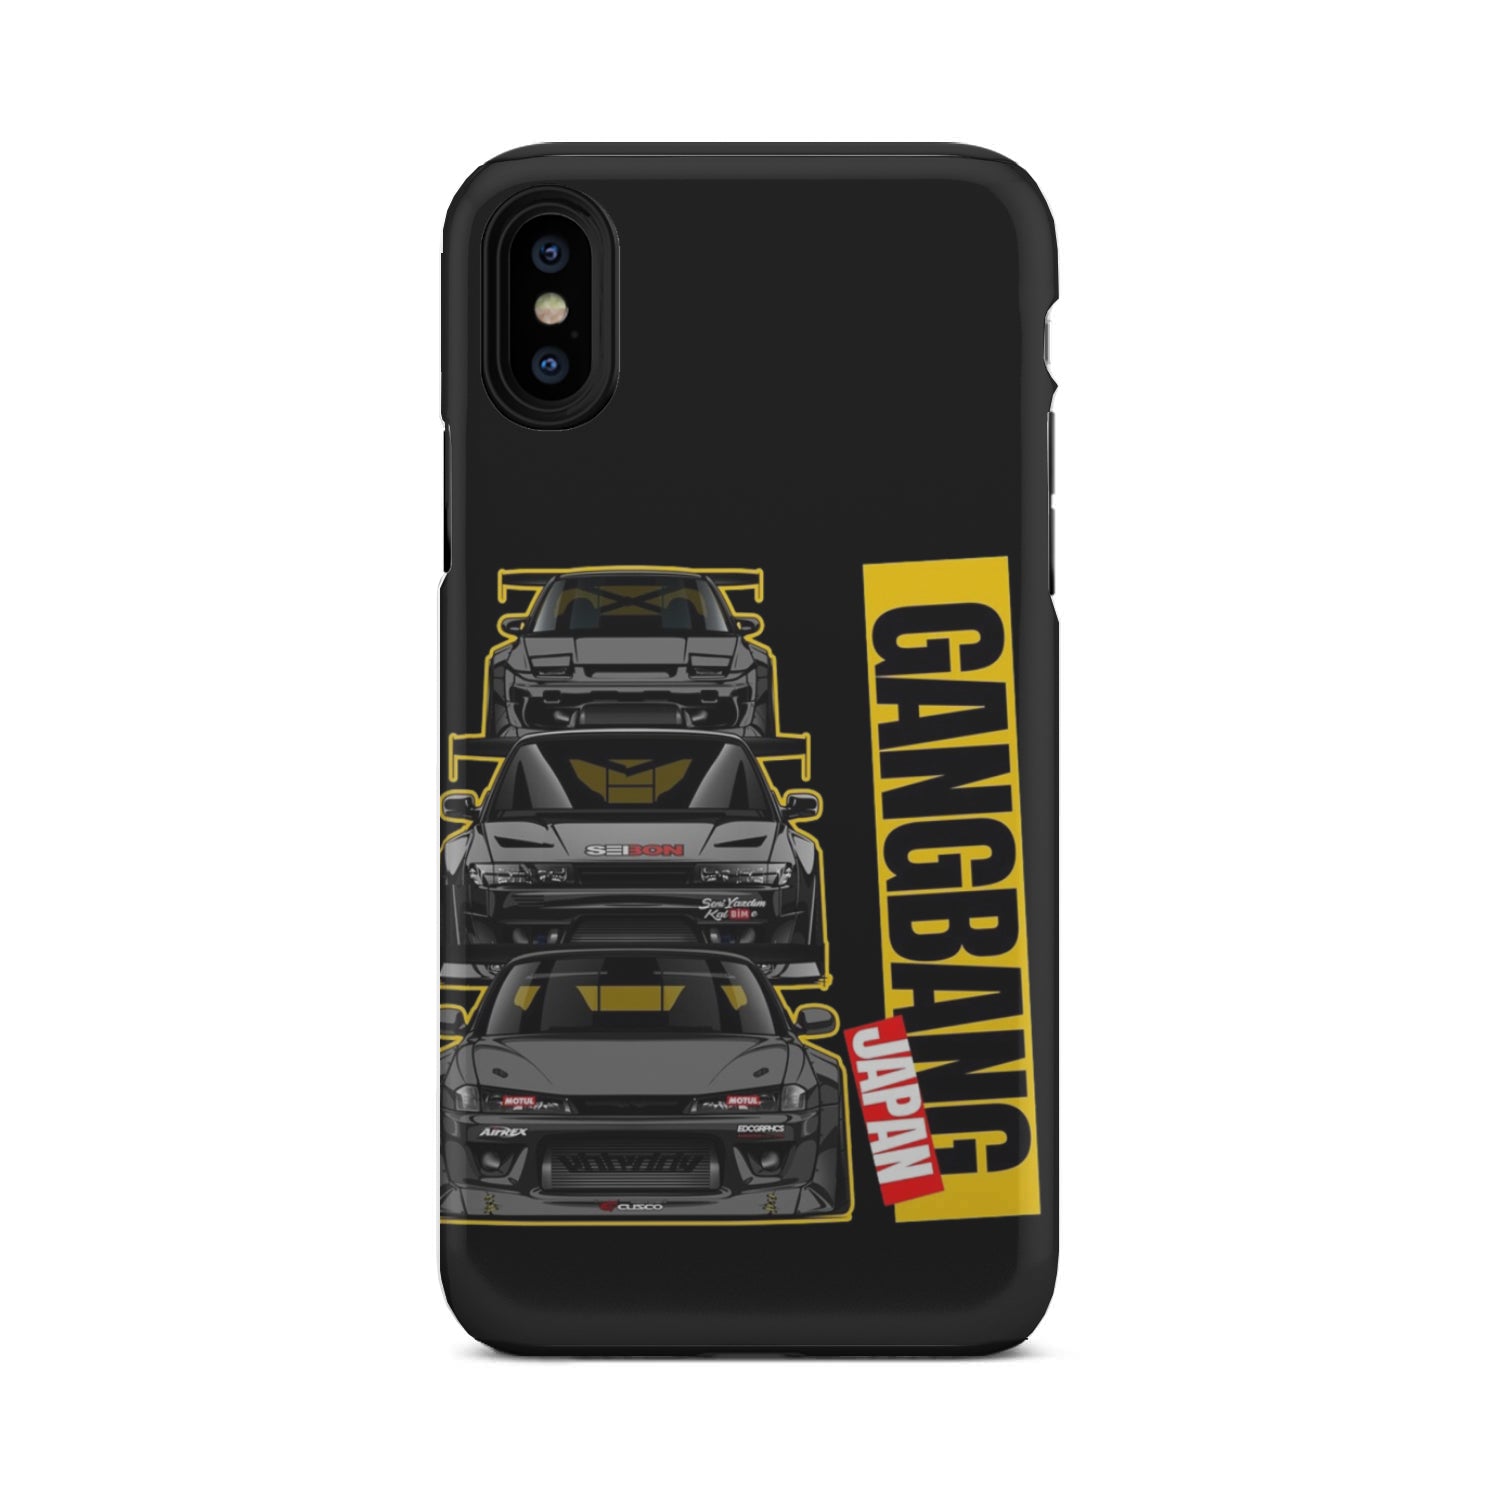 Nissan S-Chassis Phone Case